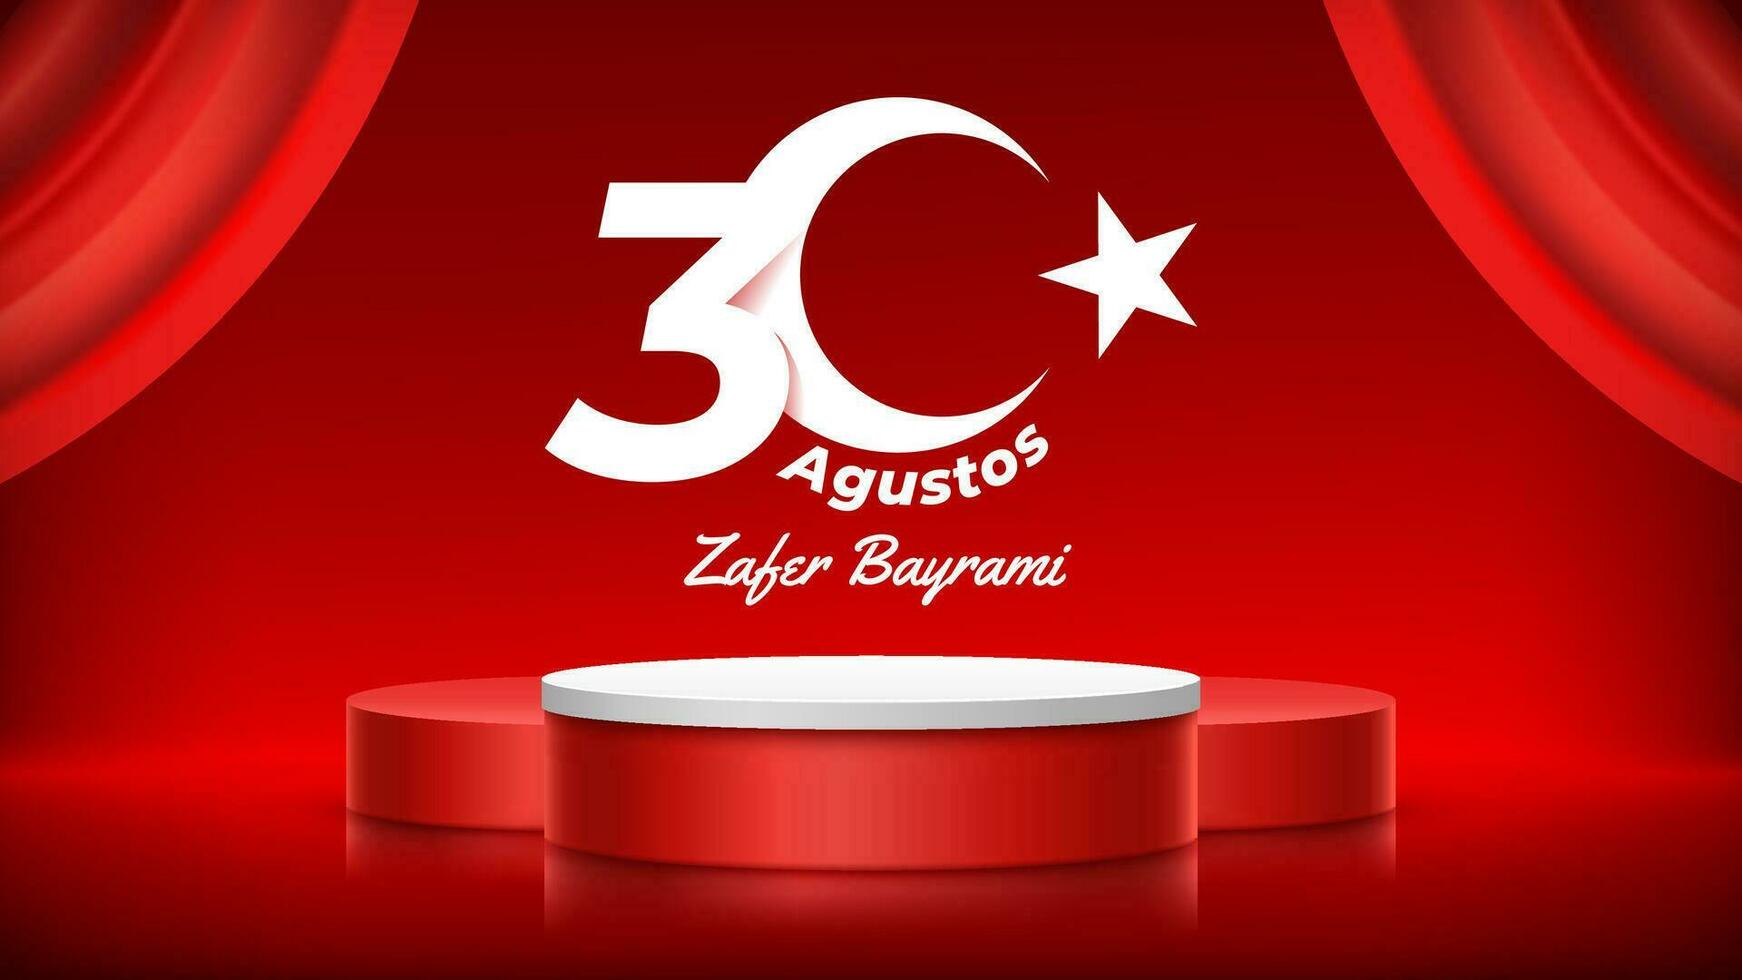 30 Agustos Zafer Bayrami Podium with Red Curtain Background vector